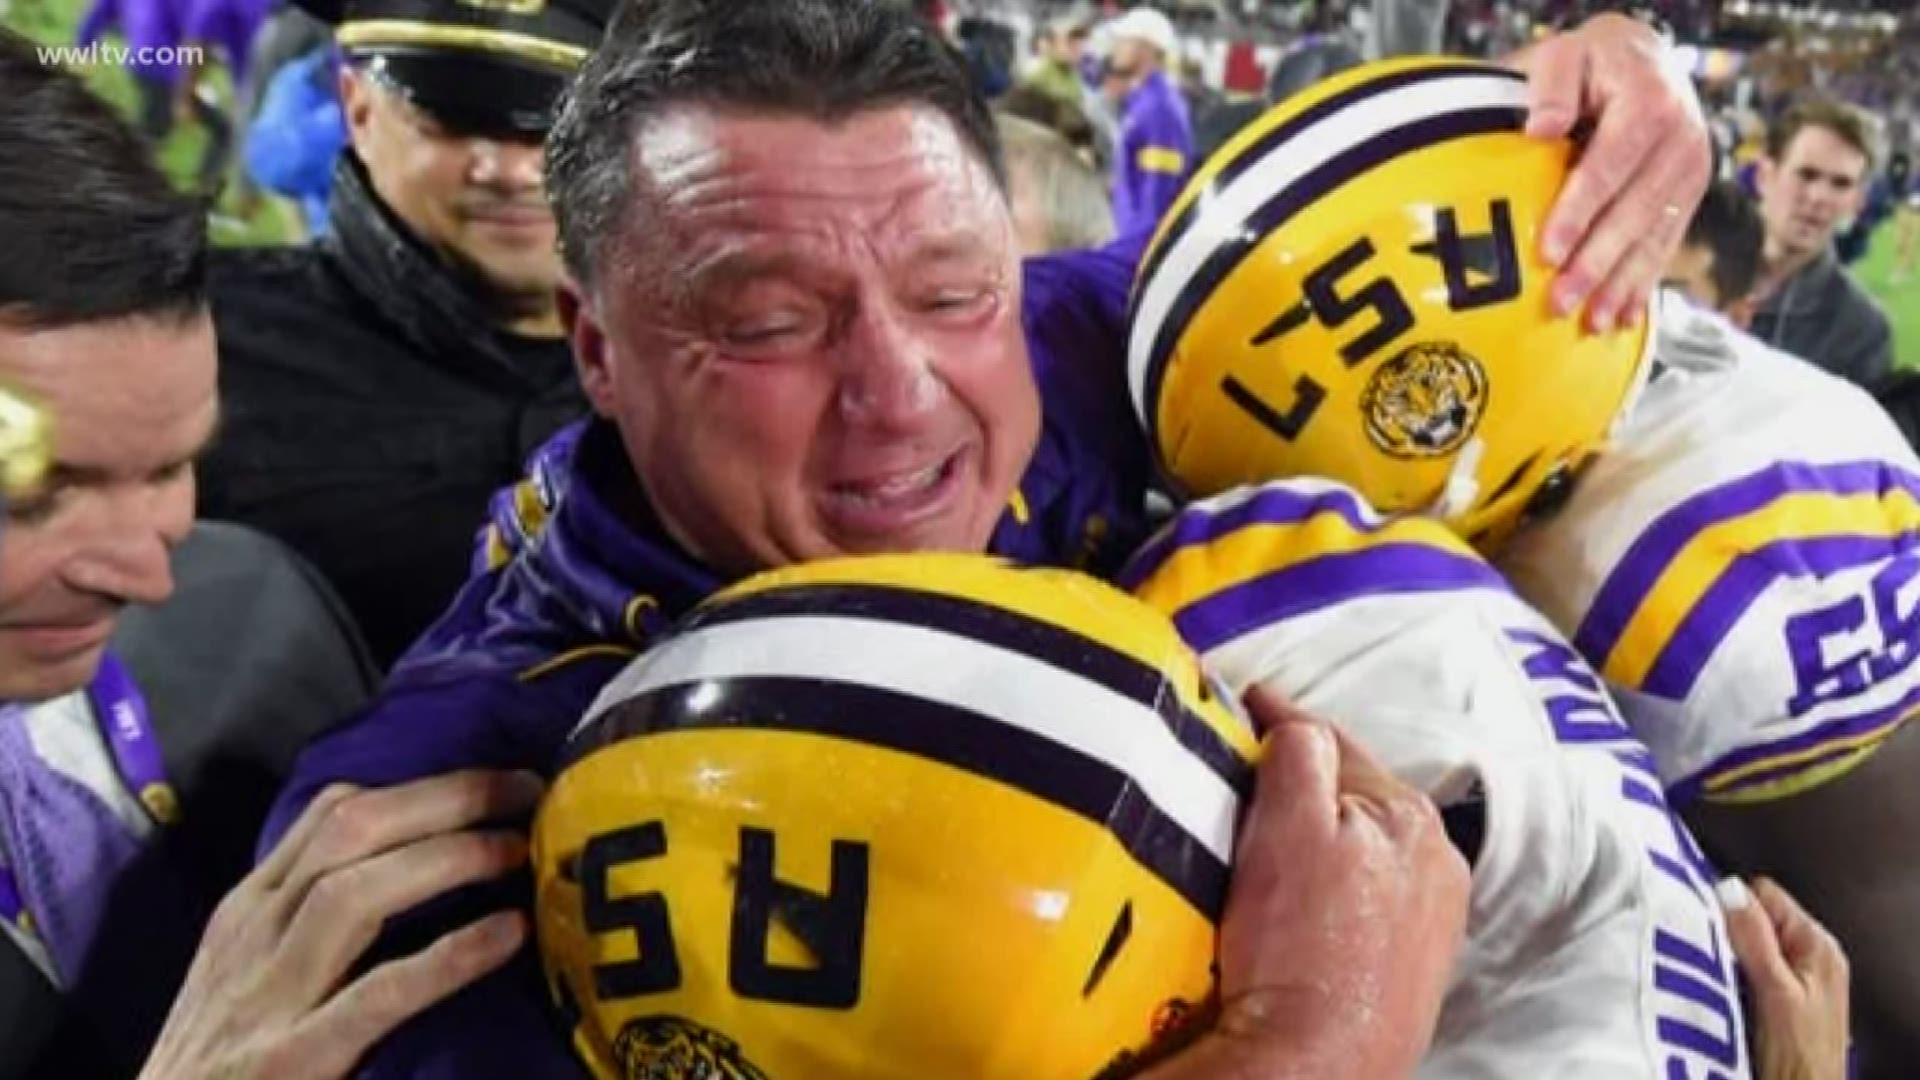 Many people from Coach O's hometown were proud to see what he's accomplished